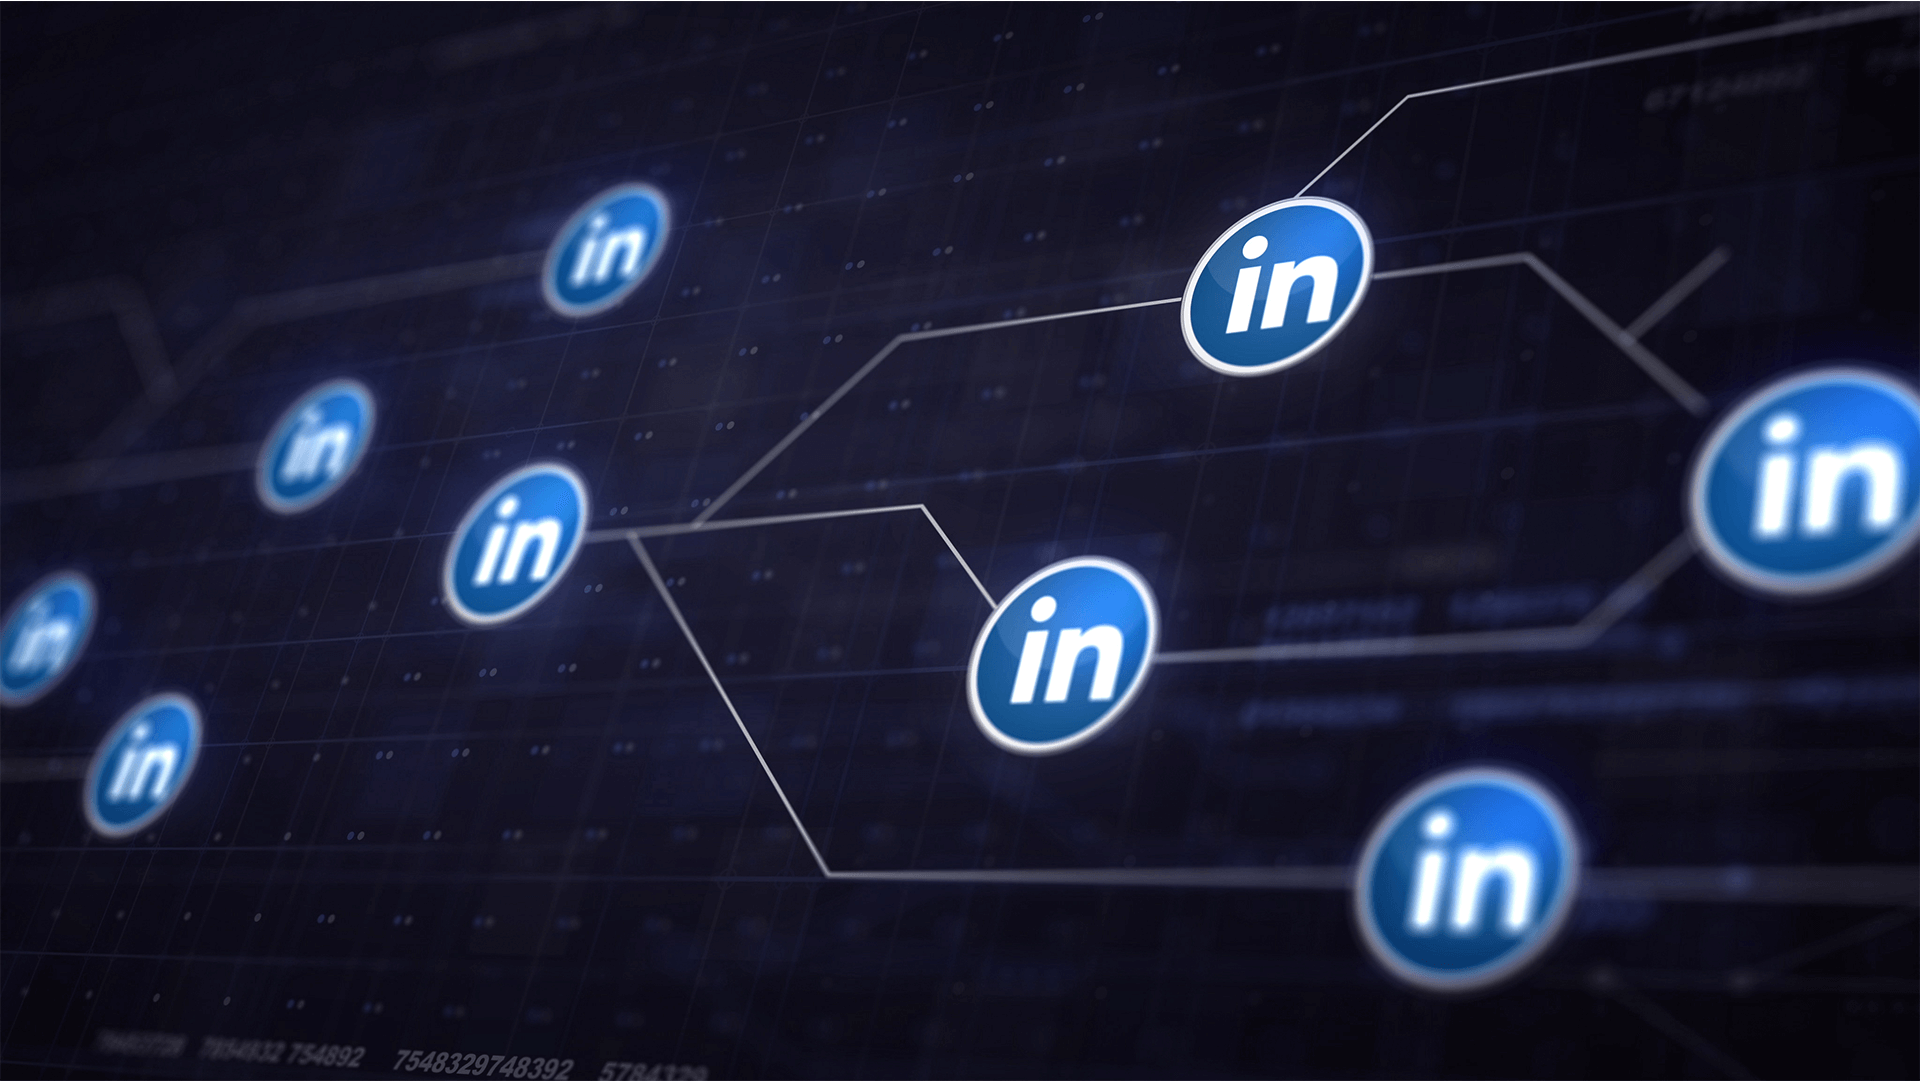 A digital network visualization featuring nodes with the linkedin logo, symbolizing connections and growth within the professional networking platform.